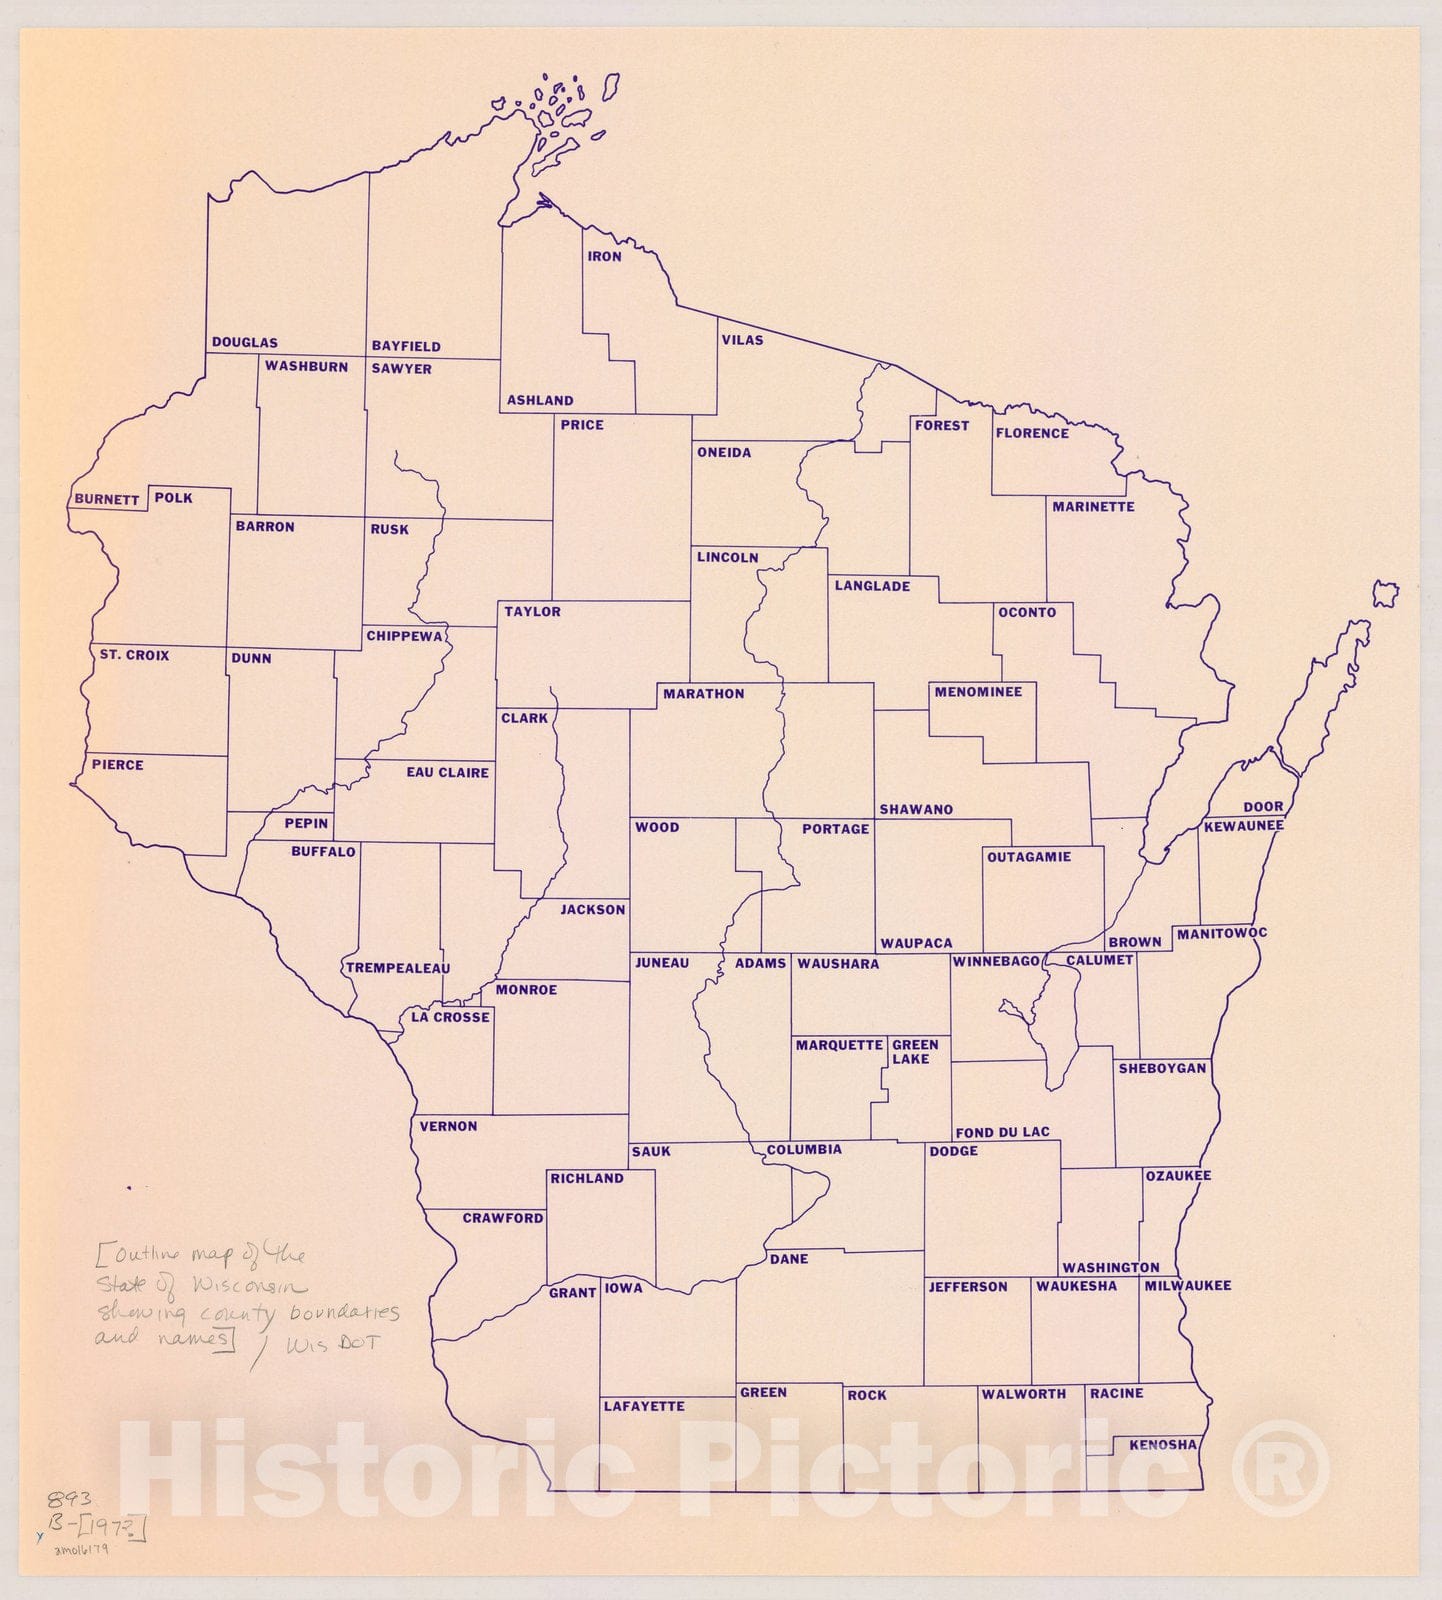 Map : Wisconsin 197-?, [Outline map of the State of Wisconsin showing county boundaries and names], Antique Vintage Reproduction